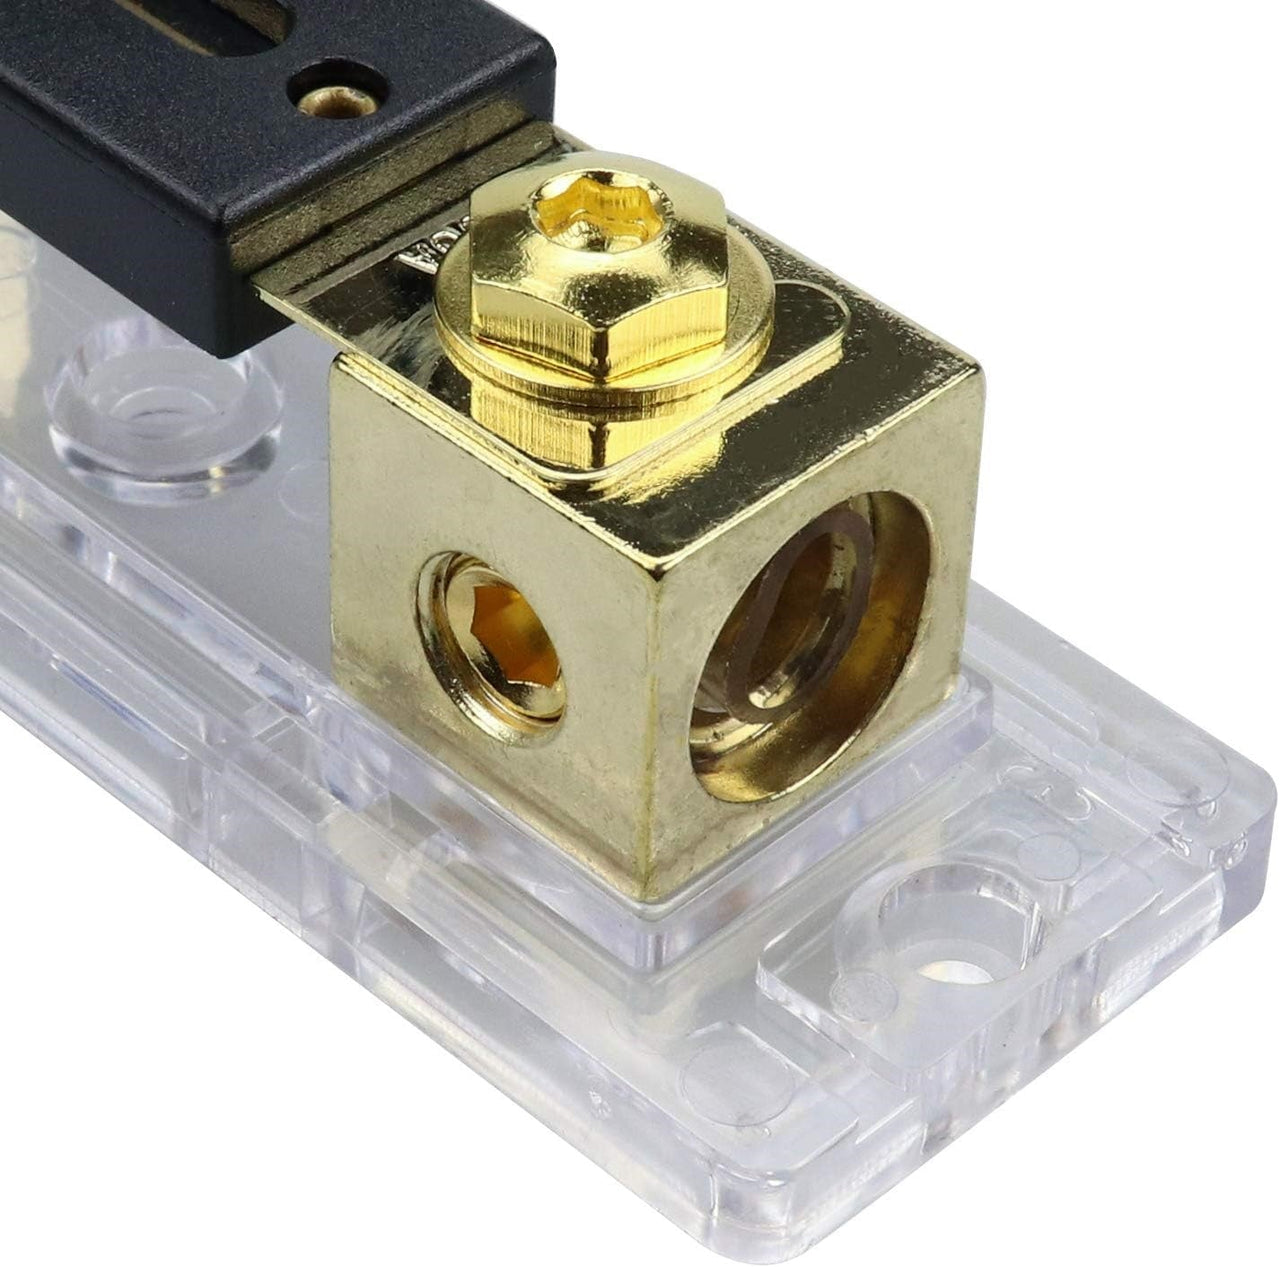 2 Absolute ANH-3 0/2/4 Gauge AWG in-Line ANL Fuse Holder & 2 Gold Plated 60 Amp Fuse